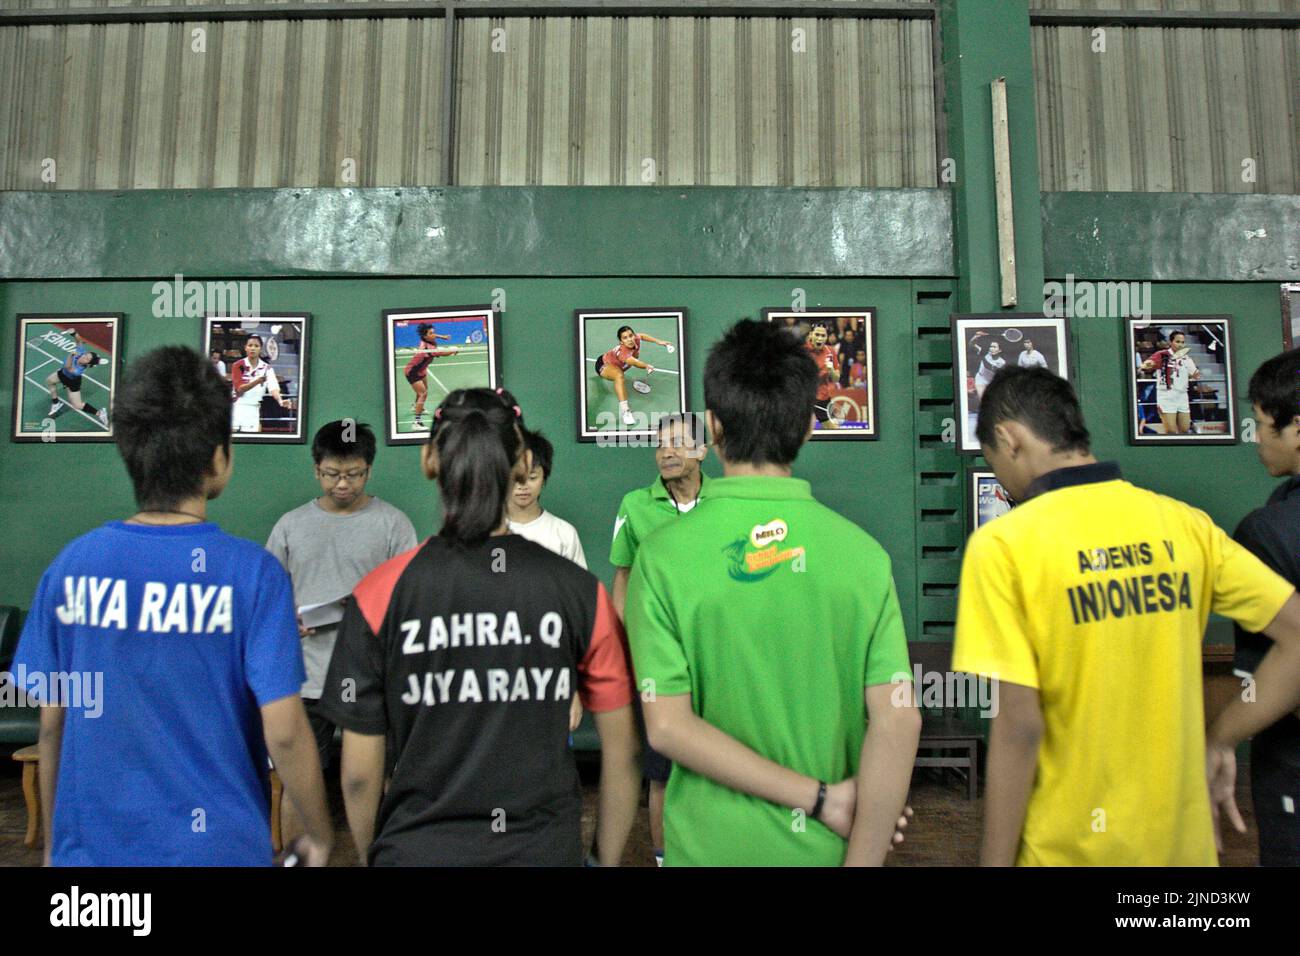 Young badminton players are given instructions during a training session at Jaya Raya badminton club in Jakarta, Indonesia. Stock Photo